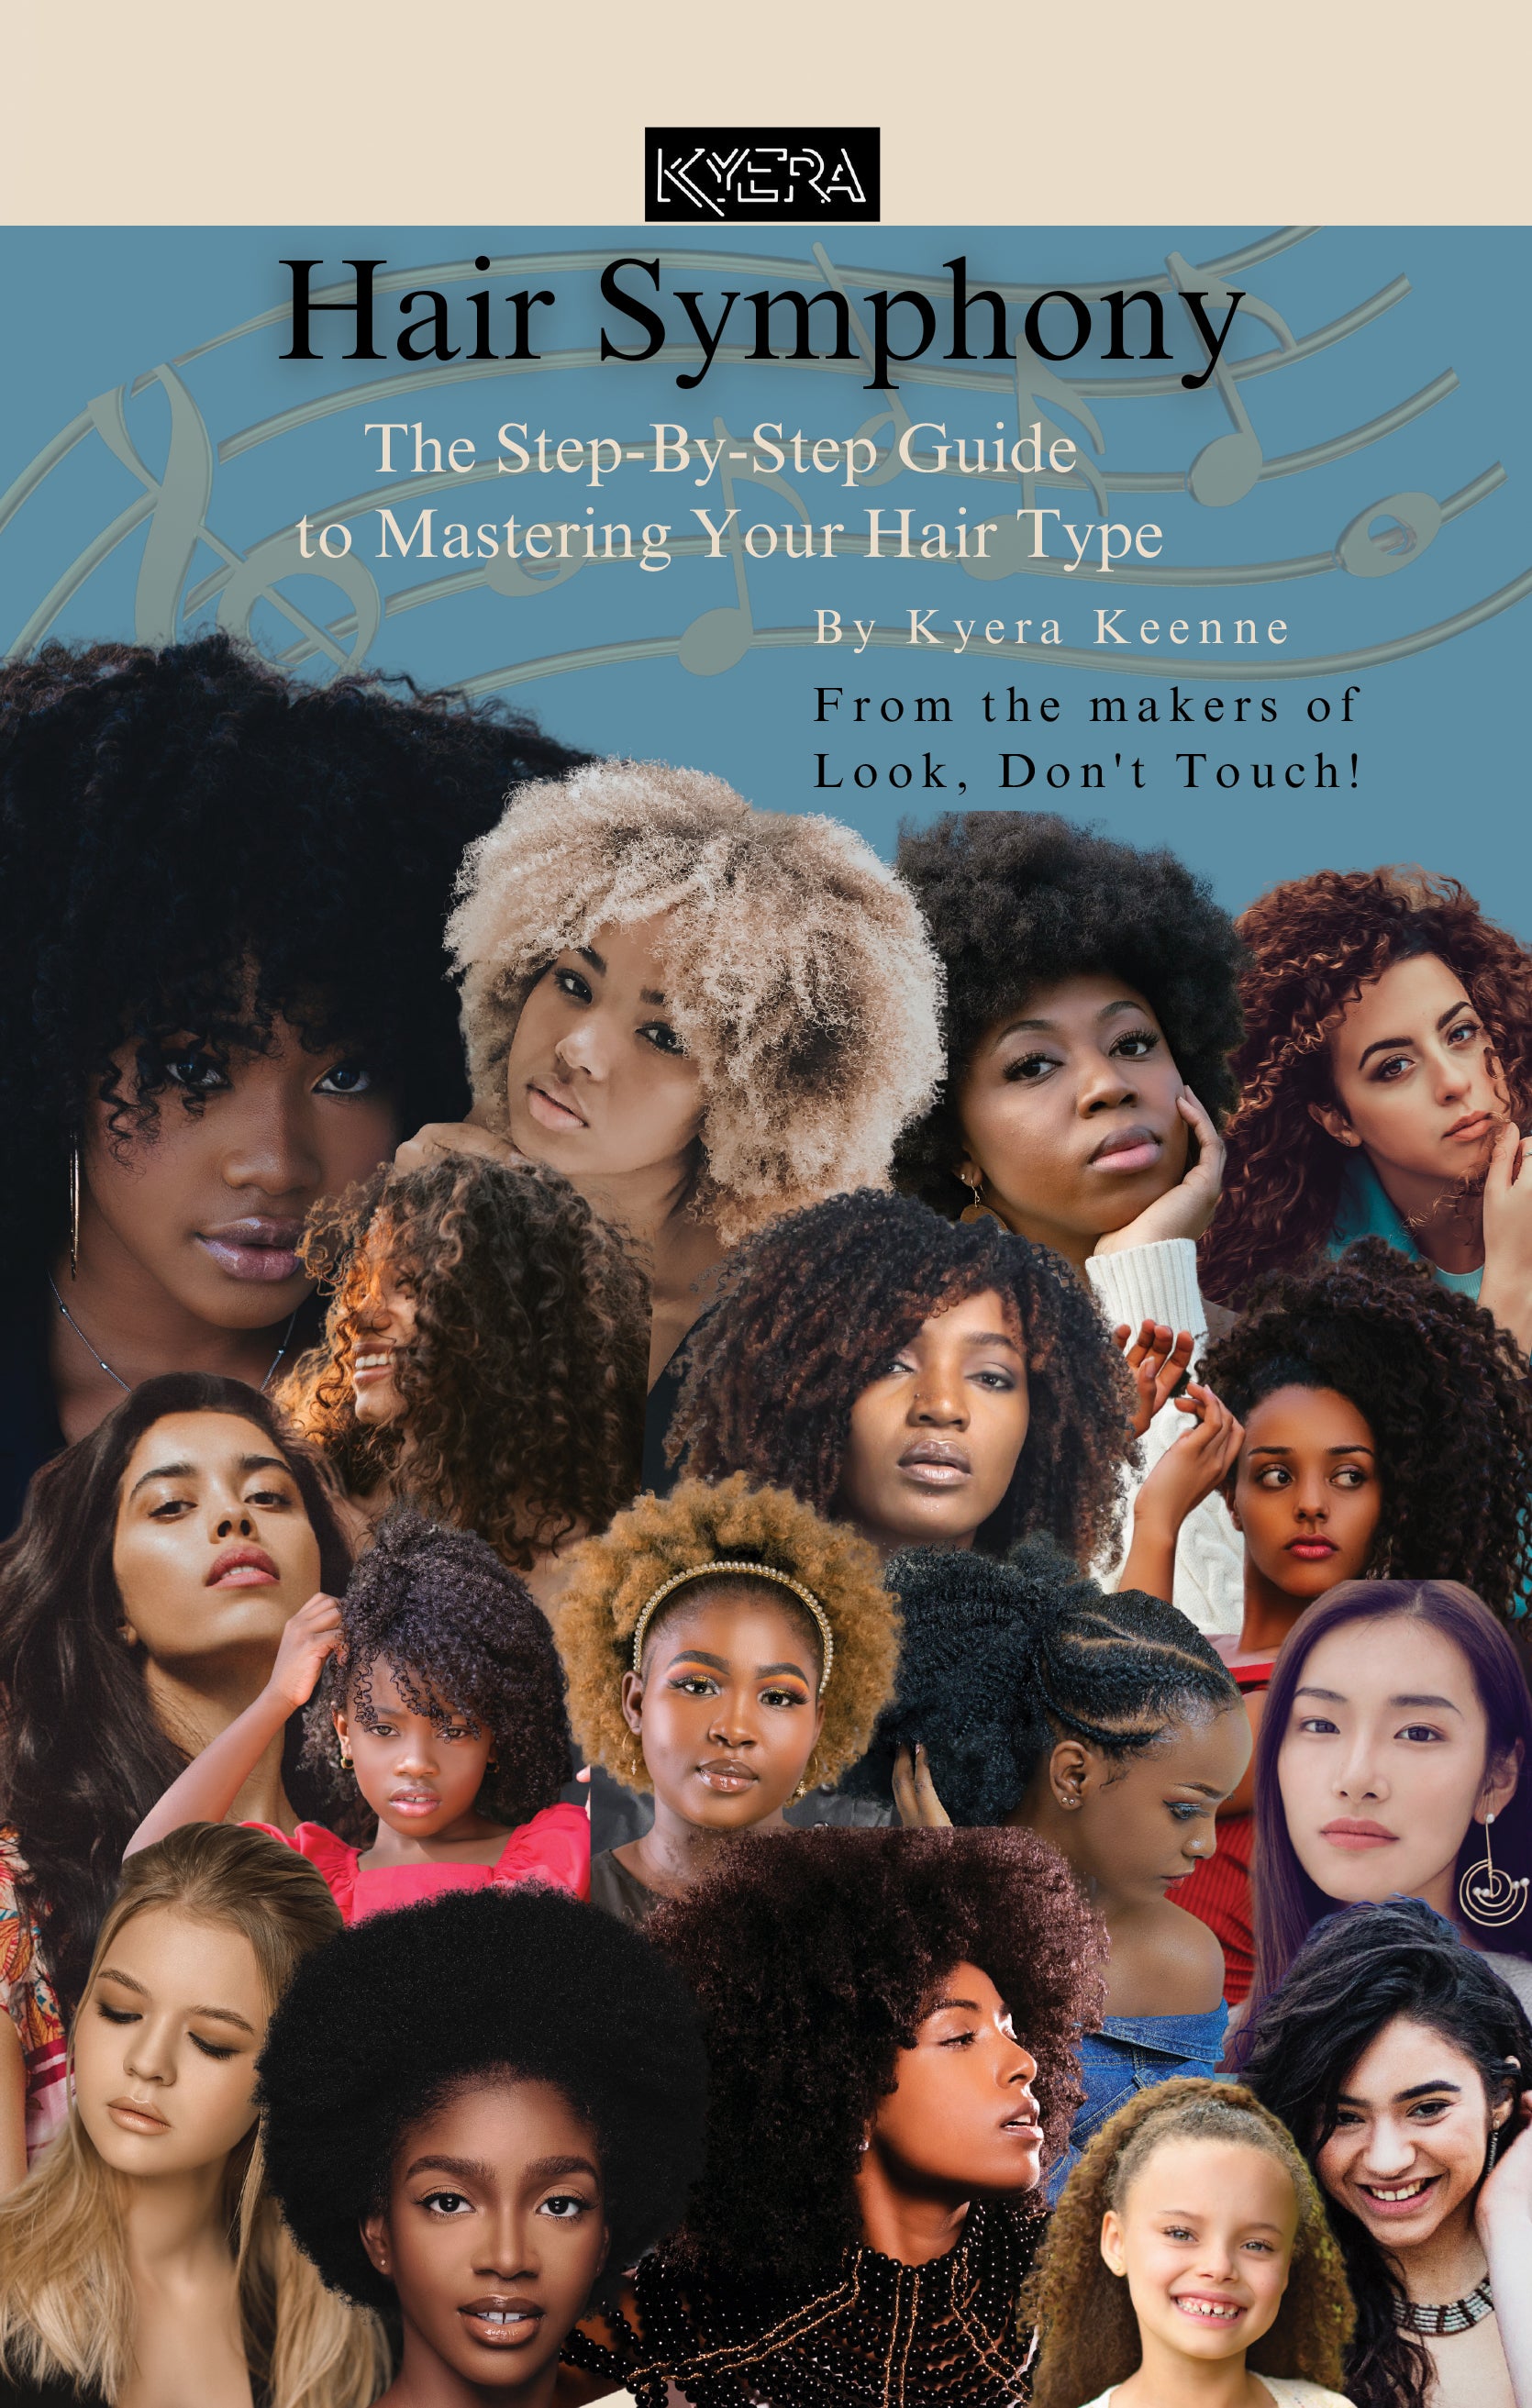 Hair Symphony -The Step-By-Step Guide to Mastering Your Hair Type (Paperback Version)